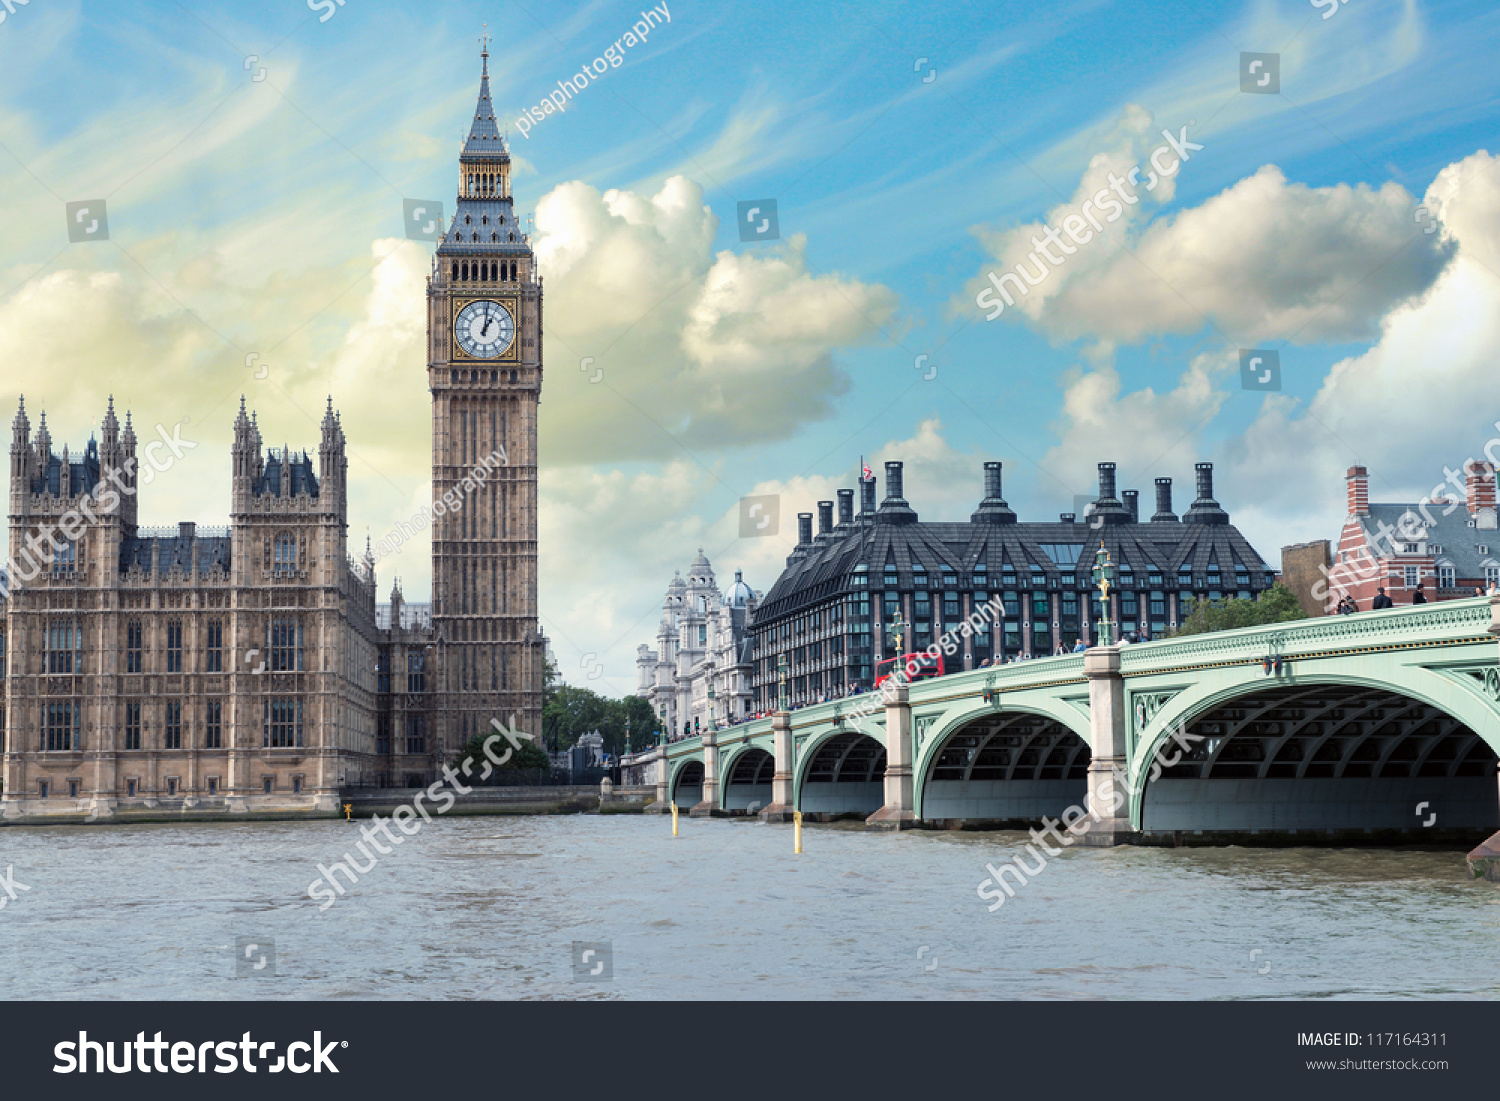 The Big Ben, the Houses of Parliament and Westminster Bridge in London. #117164311